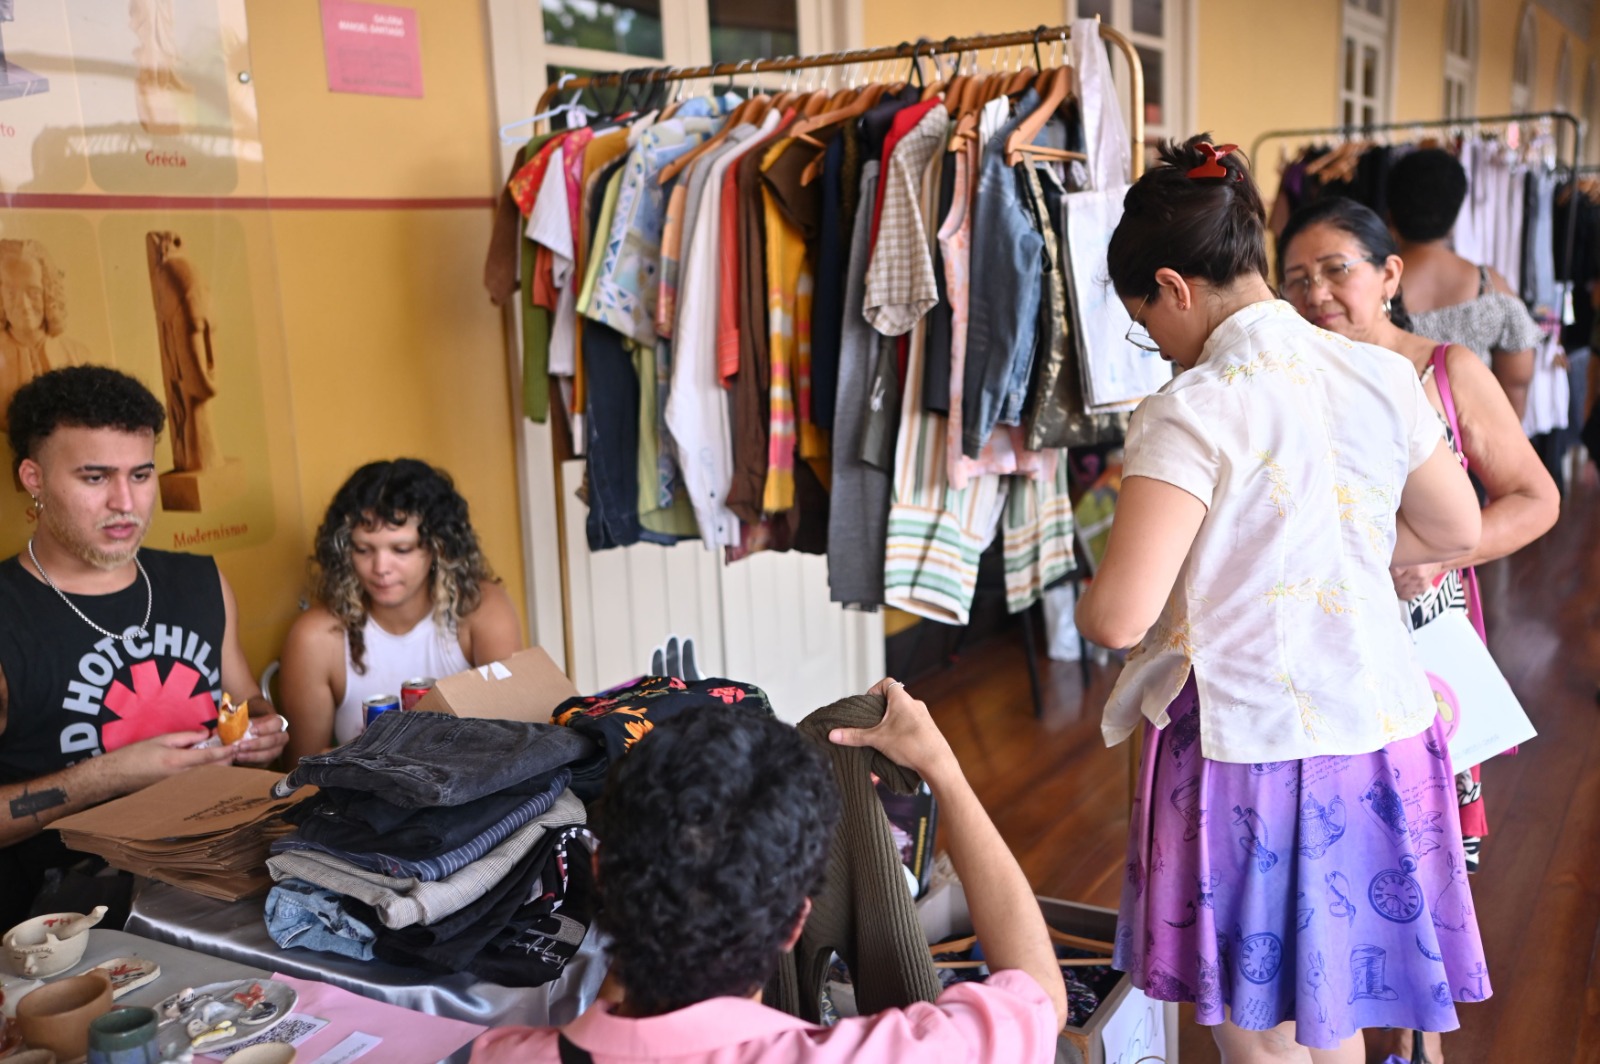 Fair brings together products from LGBTQIAPN+ entrepreneurs in Manaus